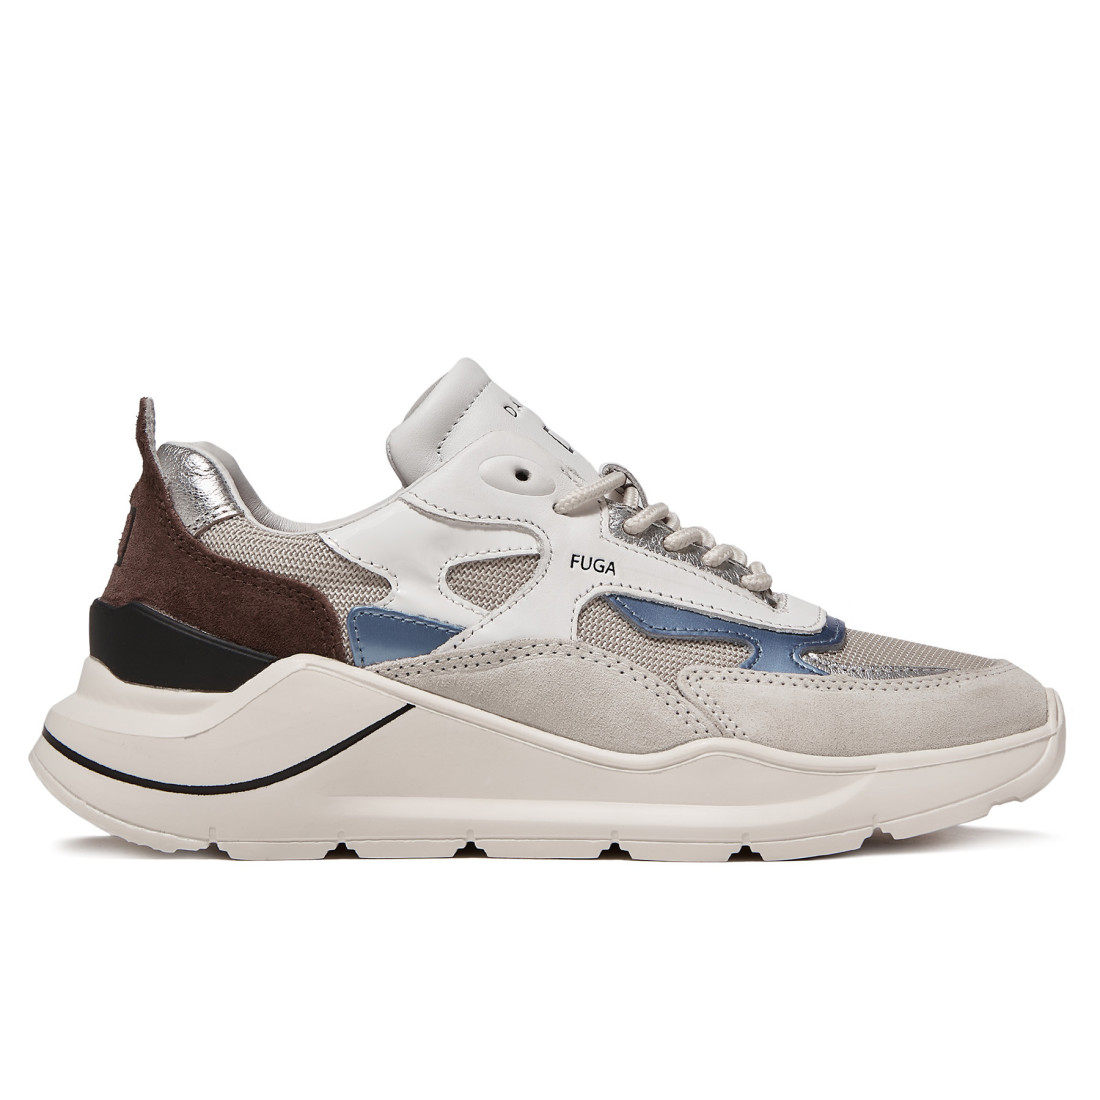 D.A.T.E. Fuga Dragon white, light blue and brown sneakers